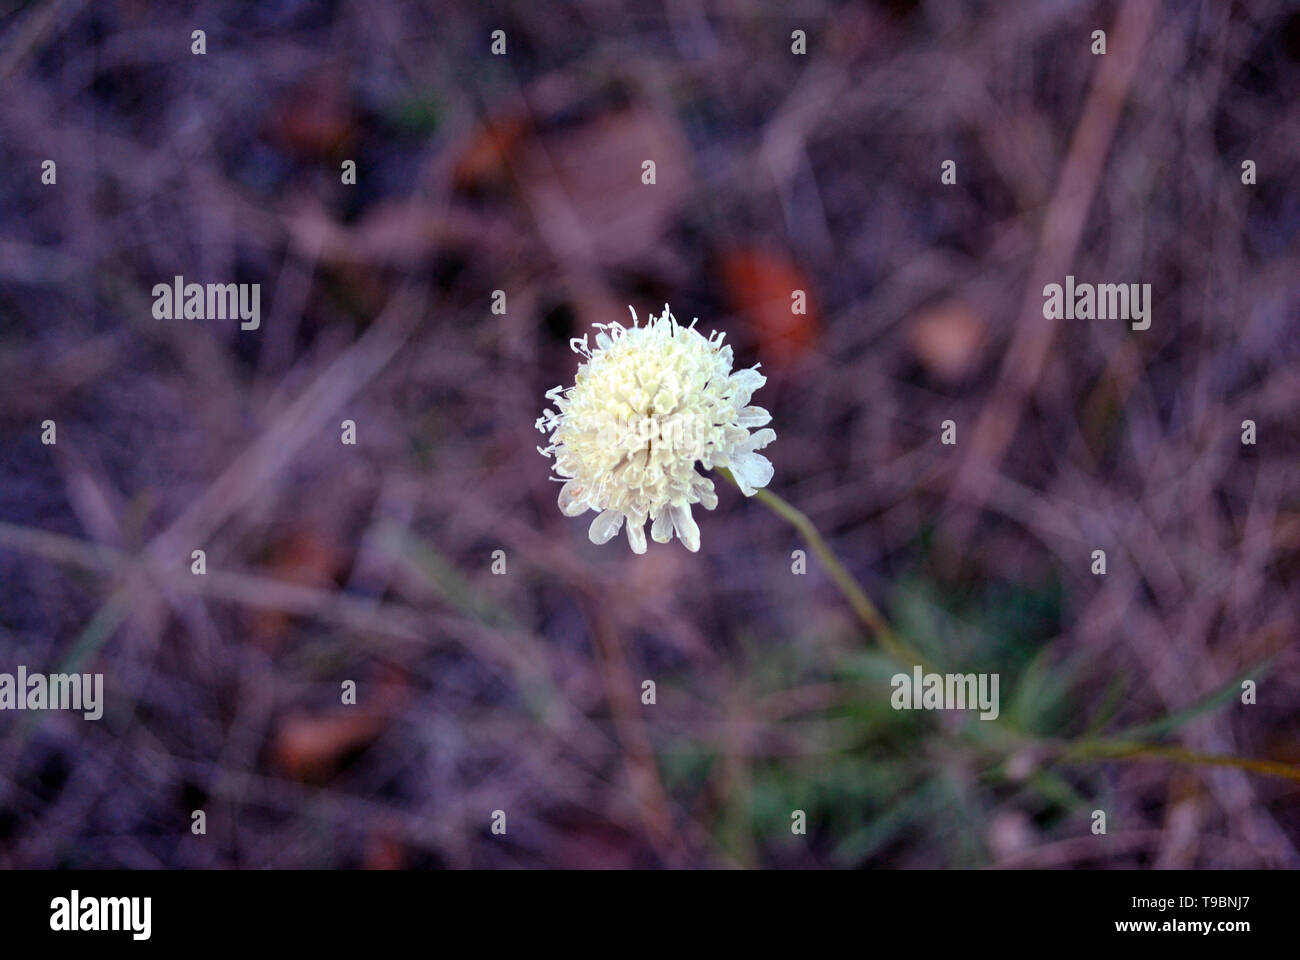 Cephalaria white flower blooming, close up macro detail on soft blurry background, top view Stock Photo